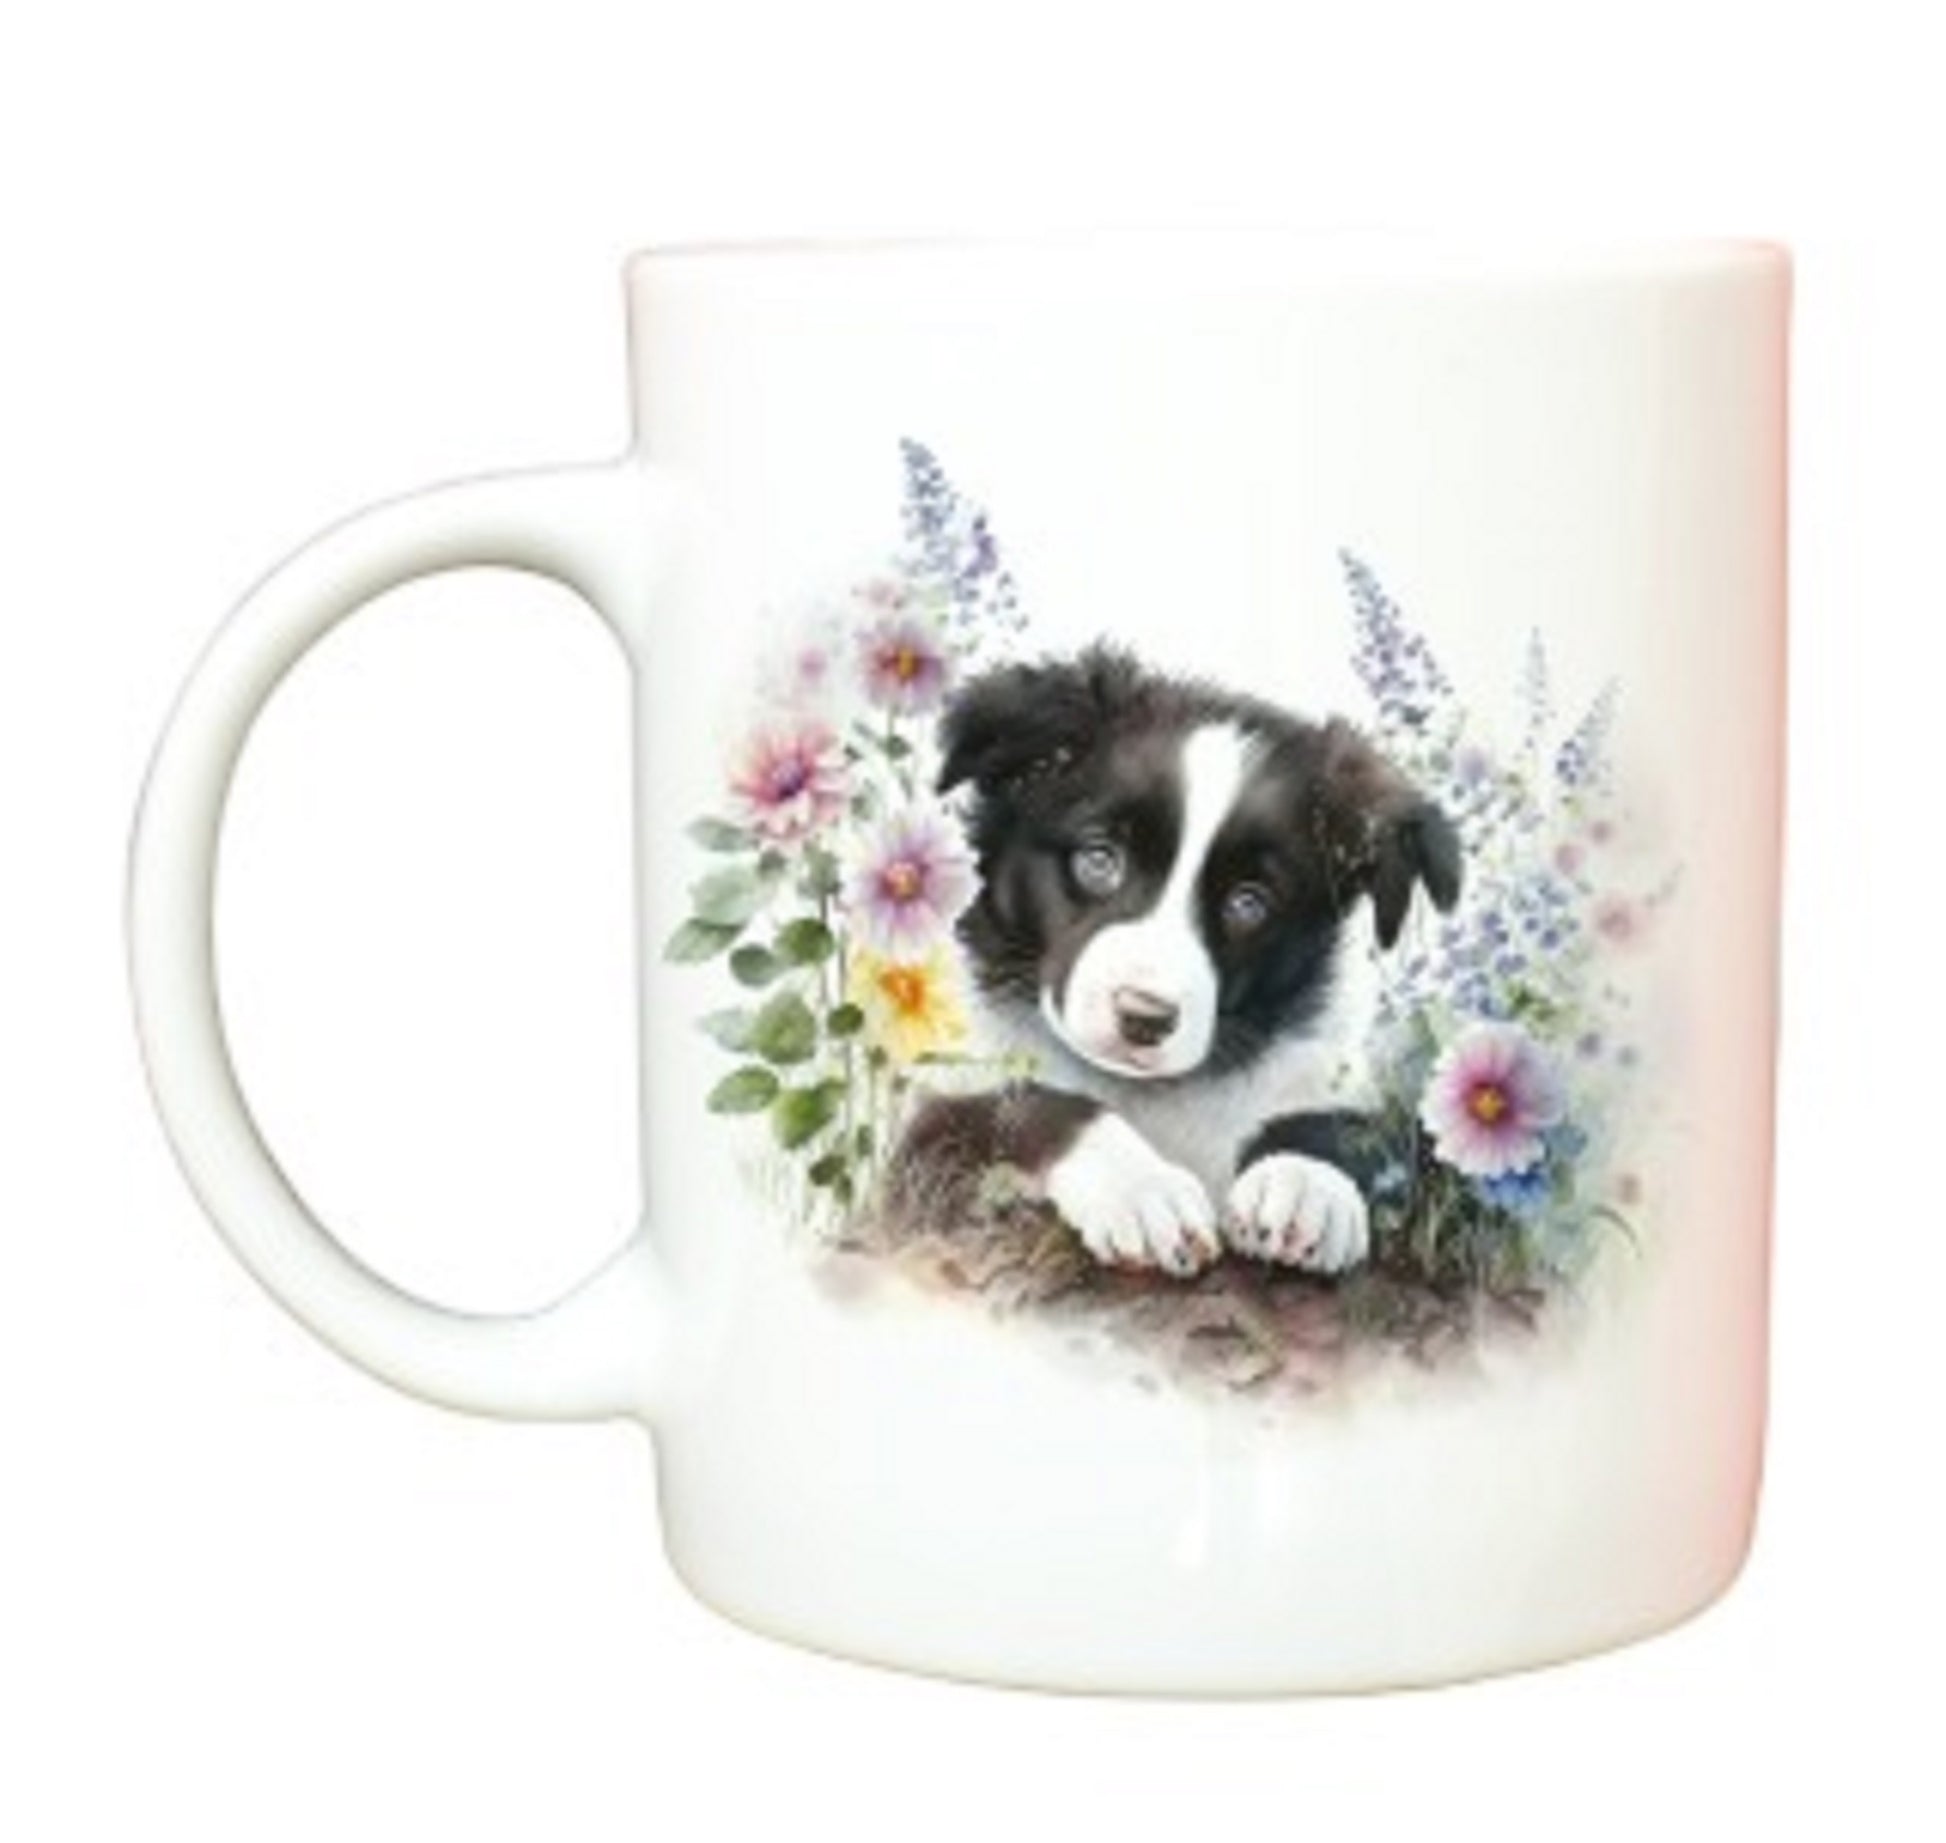  Border Collie Puppy With Flowers Mug by Free Spirit Accessories sold by Free Spirit Accessories